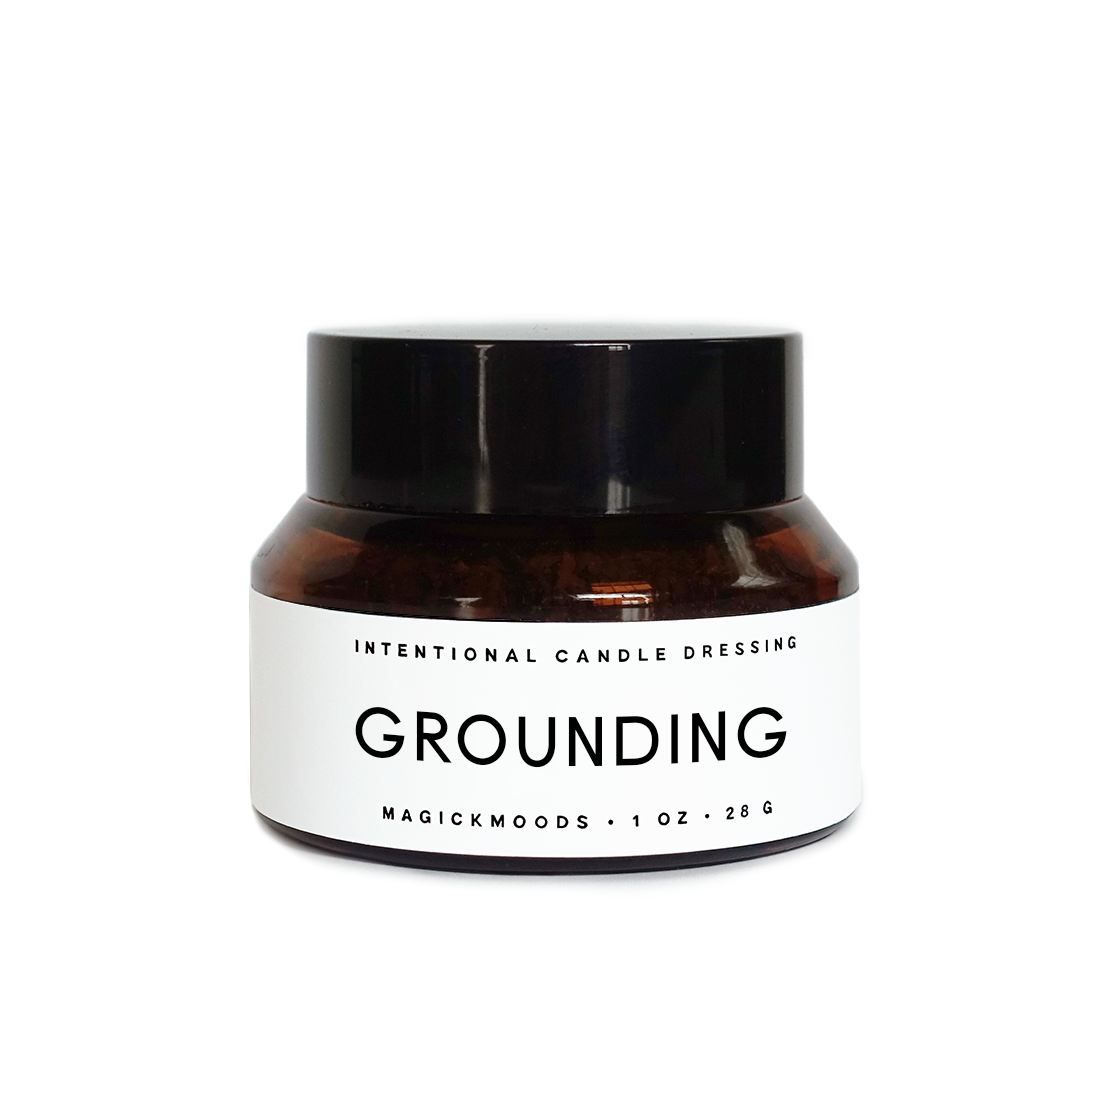 Grounding Candle Dressing